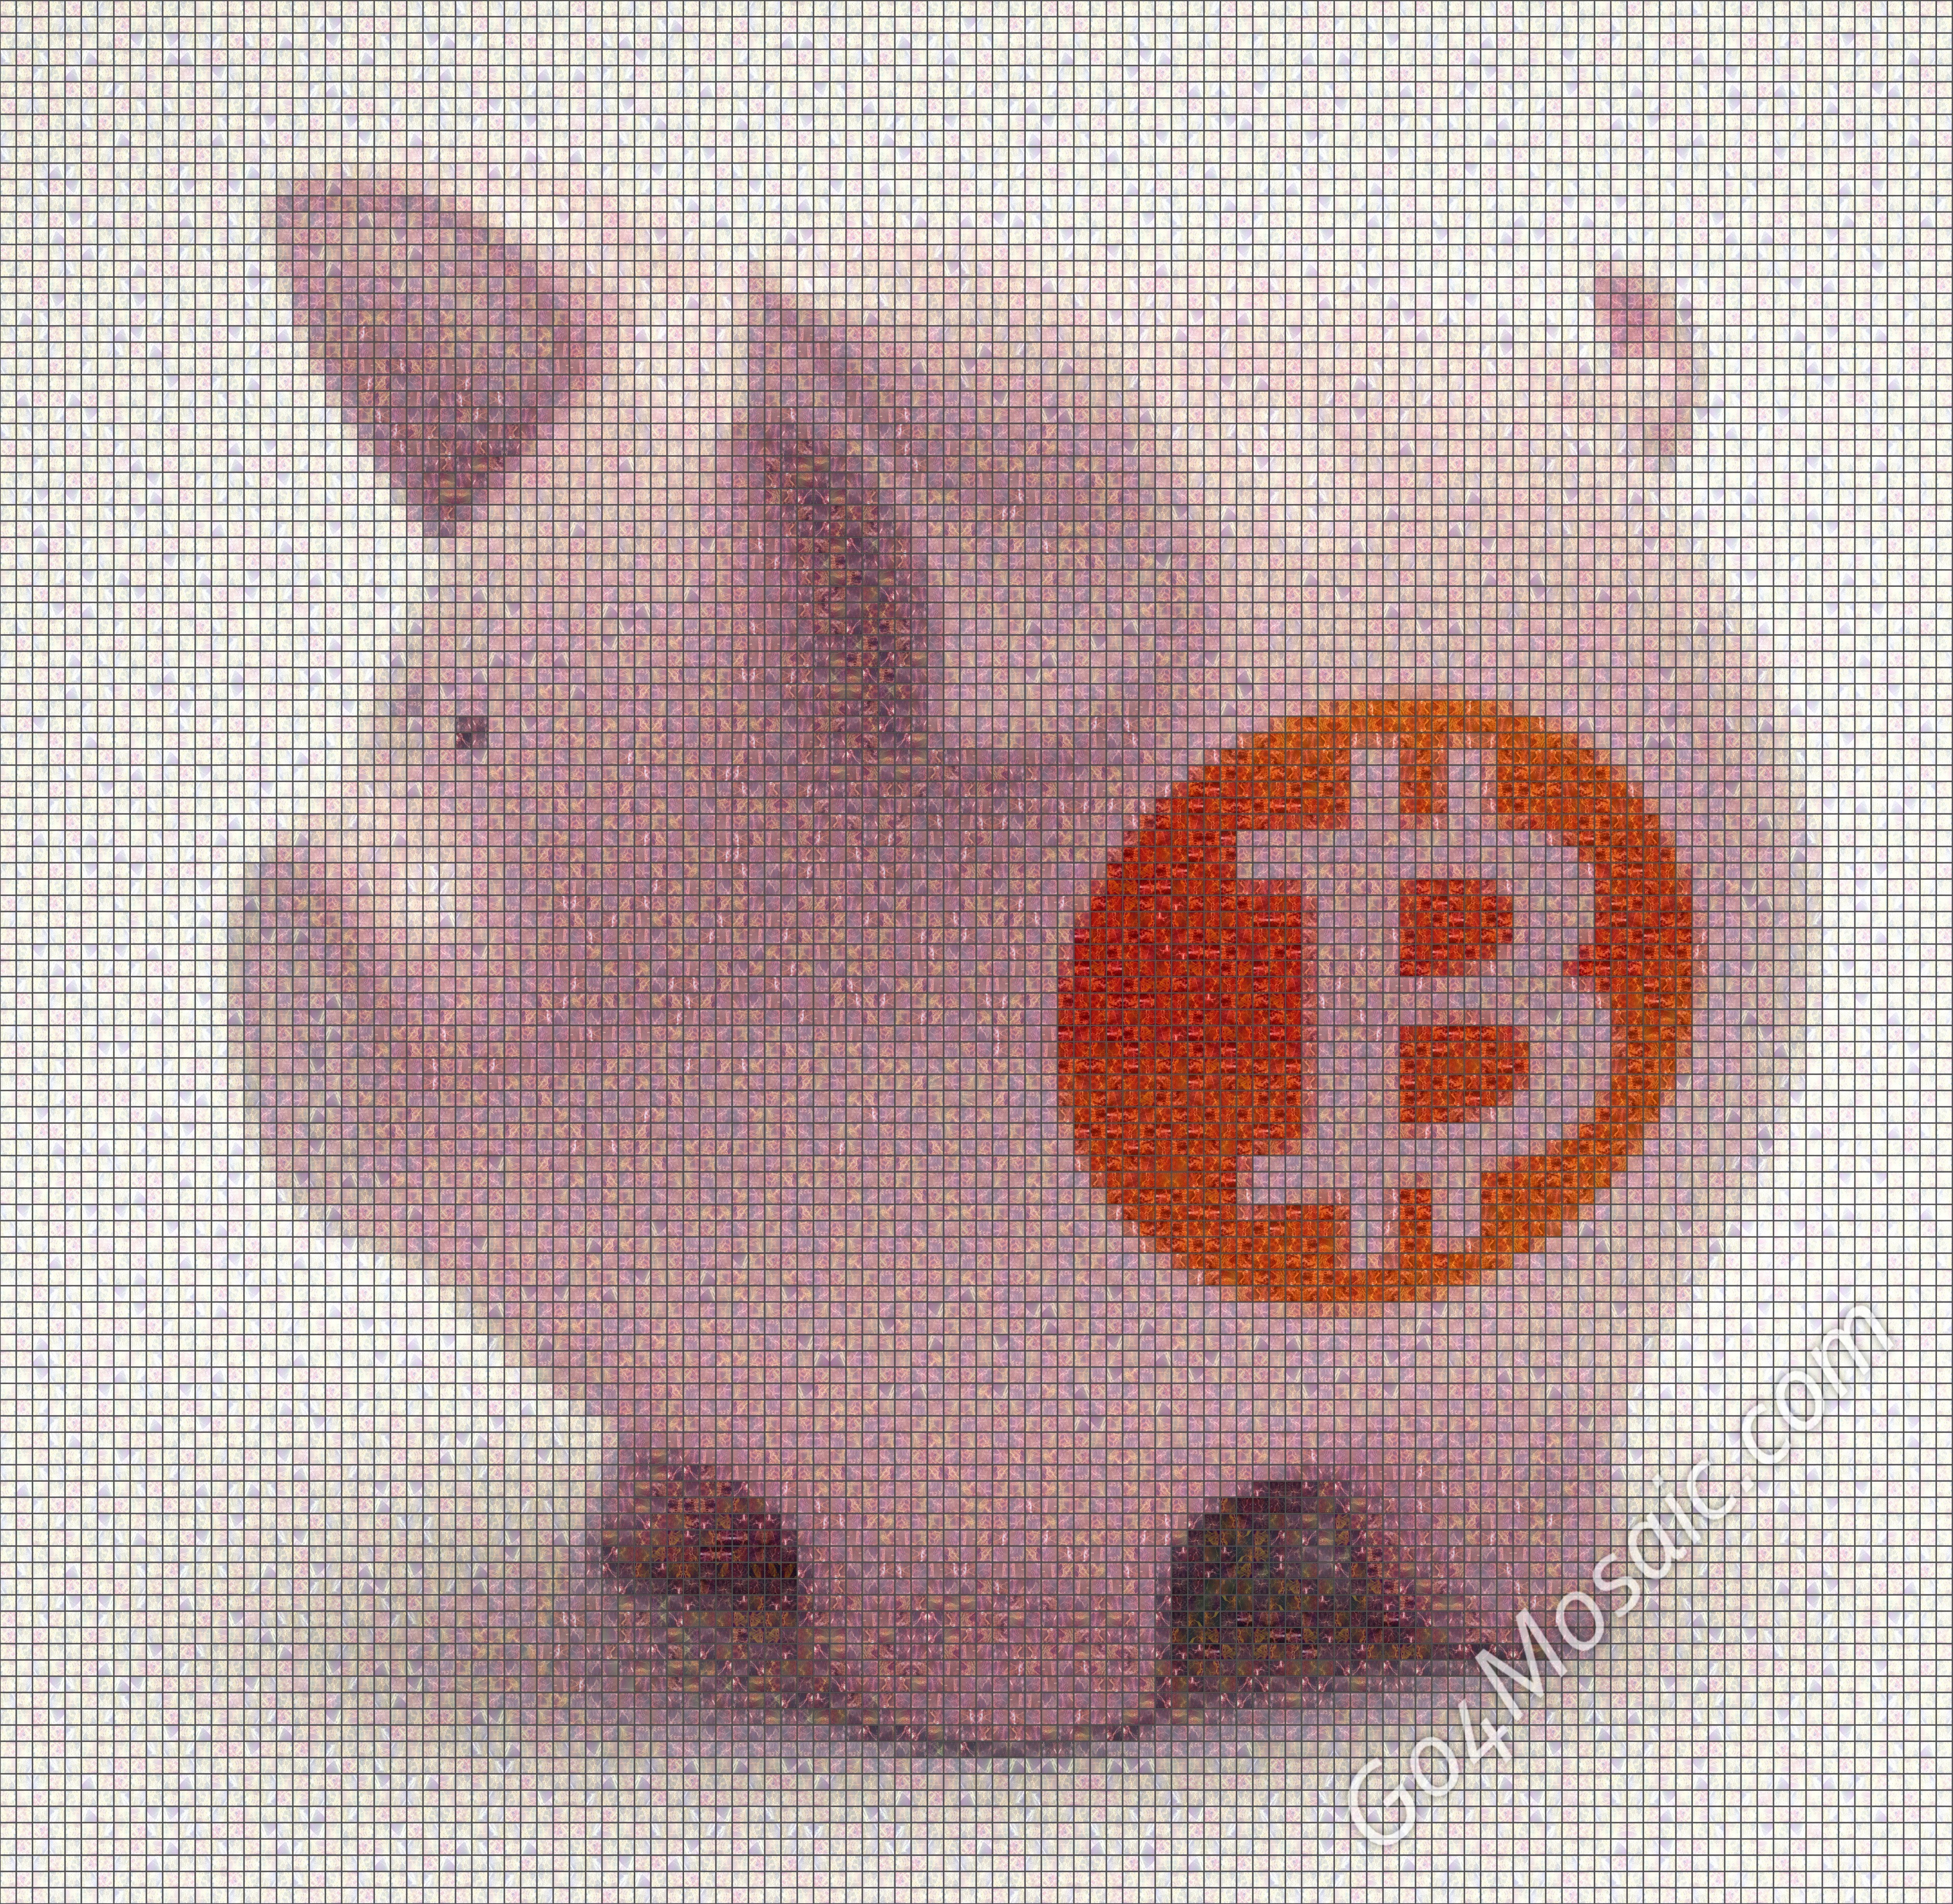 Piggy Bank with Bitcoin mosaic from Marble.